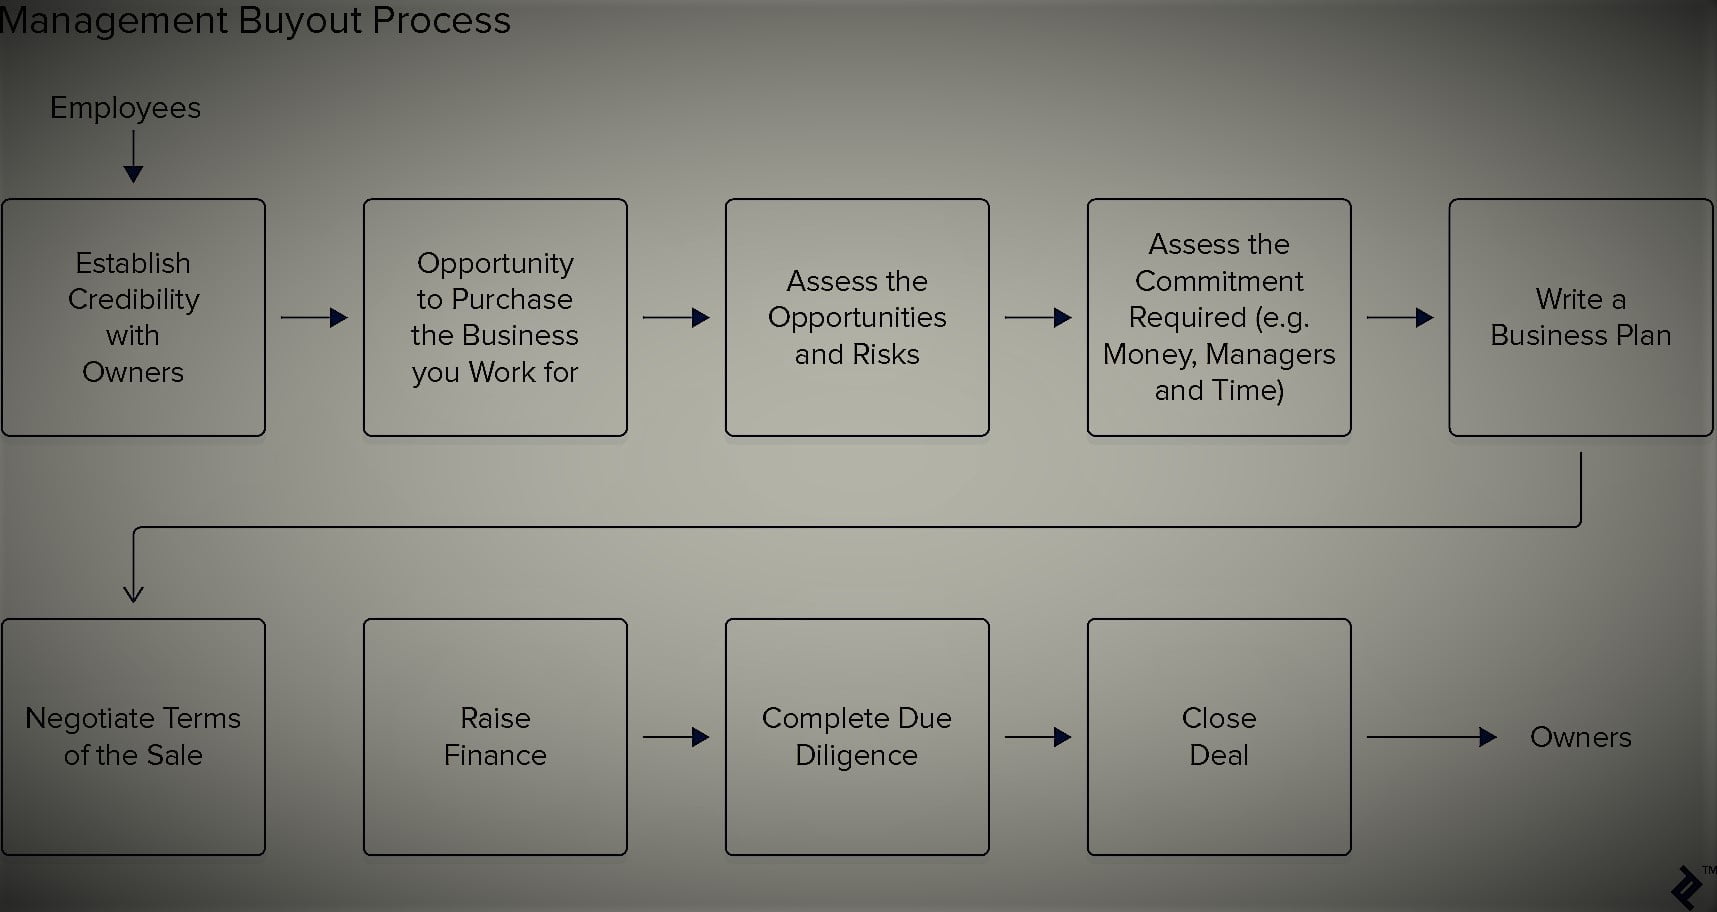 What is the Management Buyout Process?